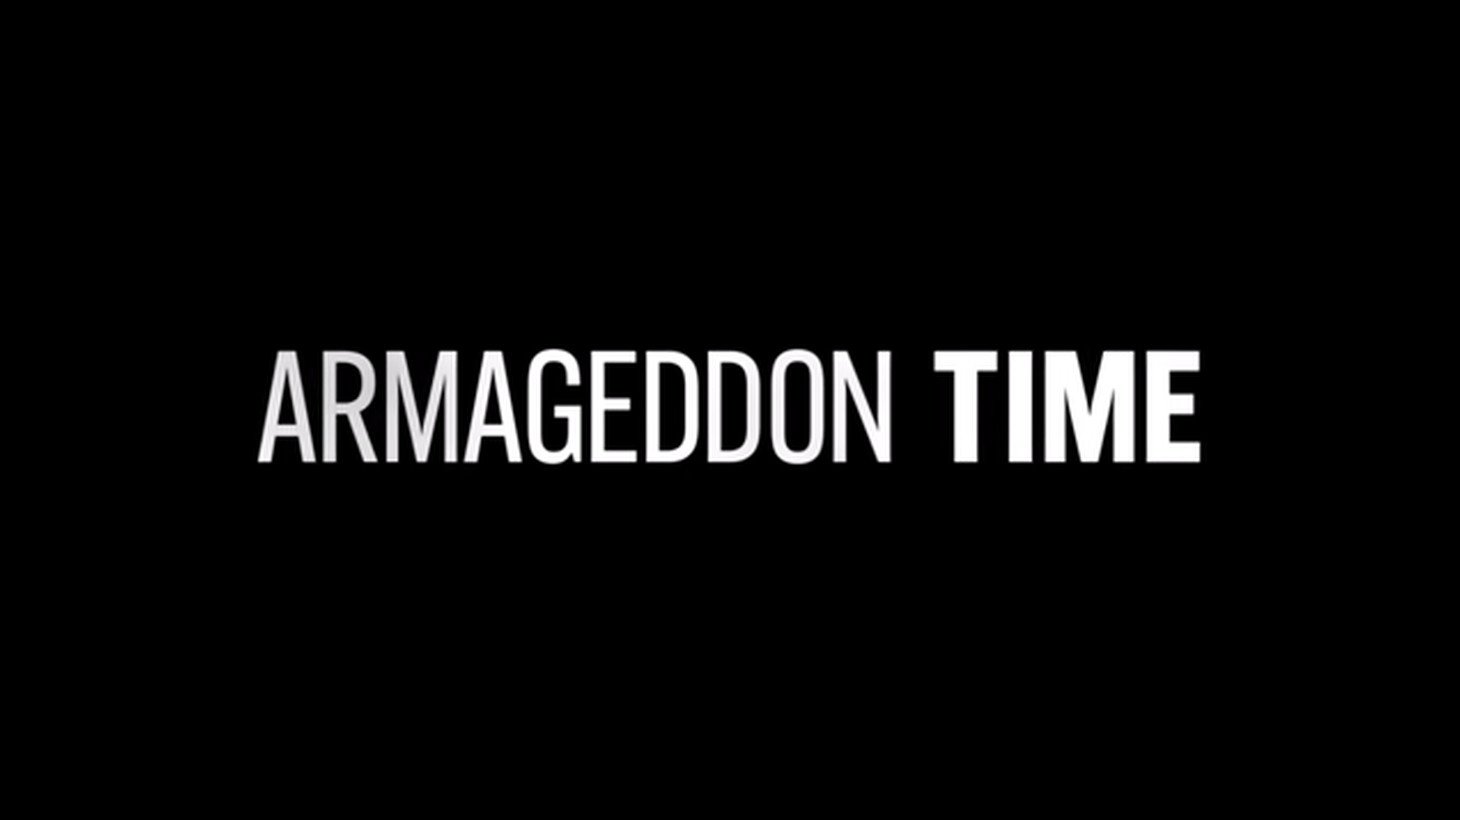 “Armageddon Time” is a coming-of-age story in 1980s America, starring Anne Hathaway, Jeremy Strong, and Anthony Hopkins.